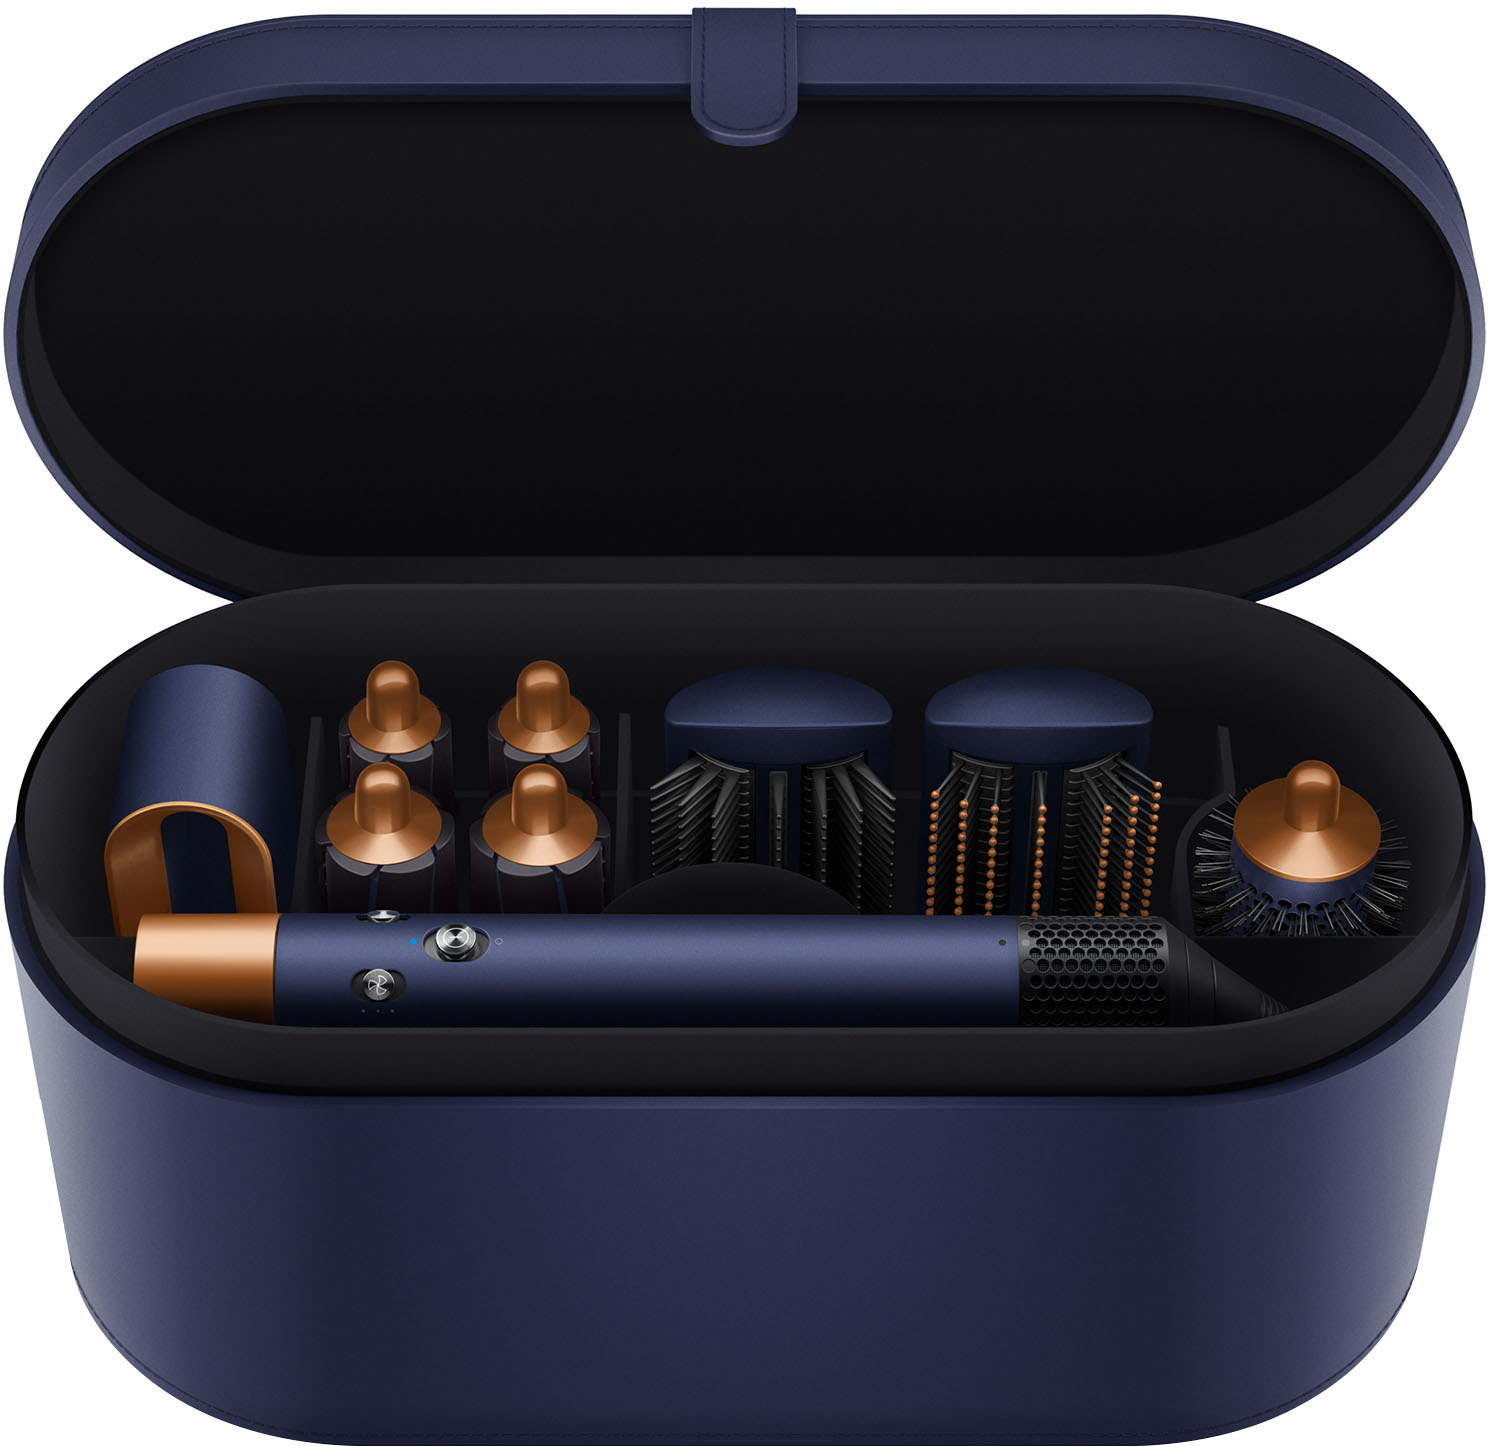 Angle View: New special edition Dyson Airwrap styler complete - Prussian blue/rich copper